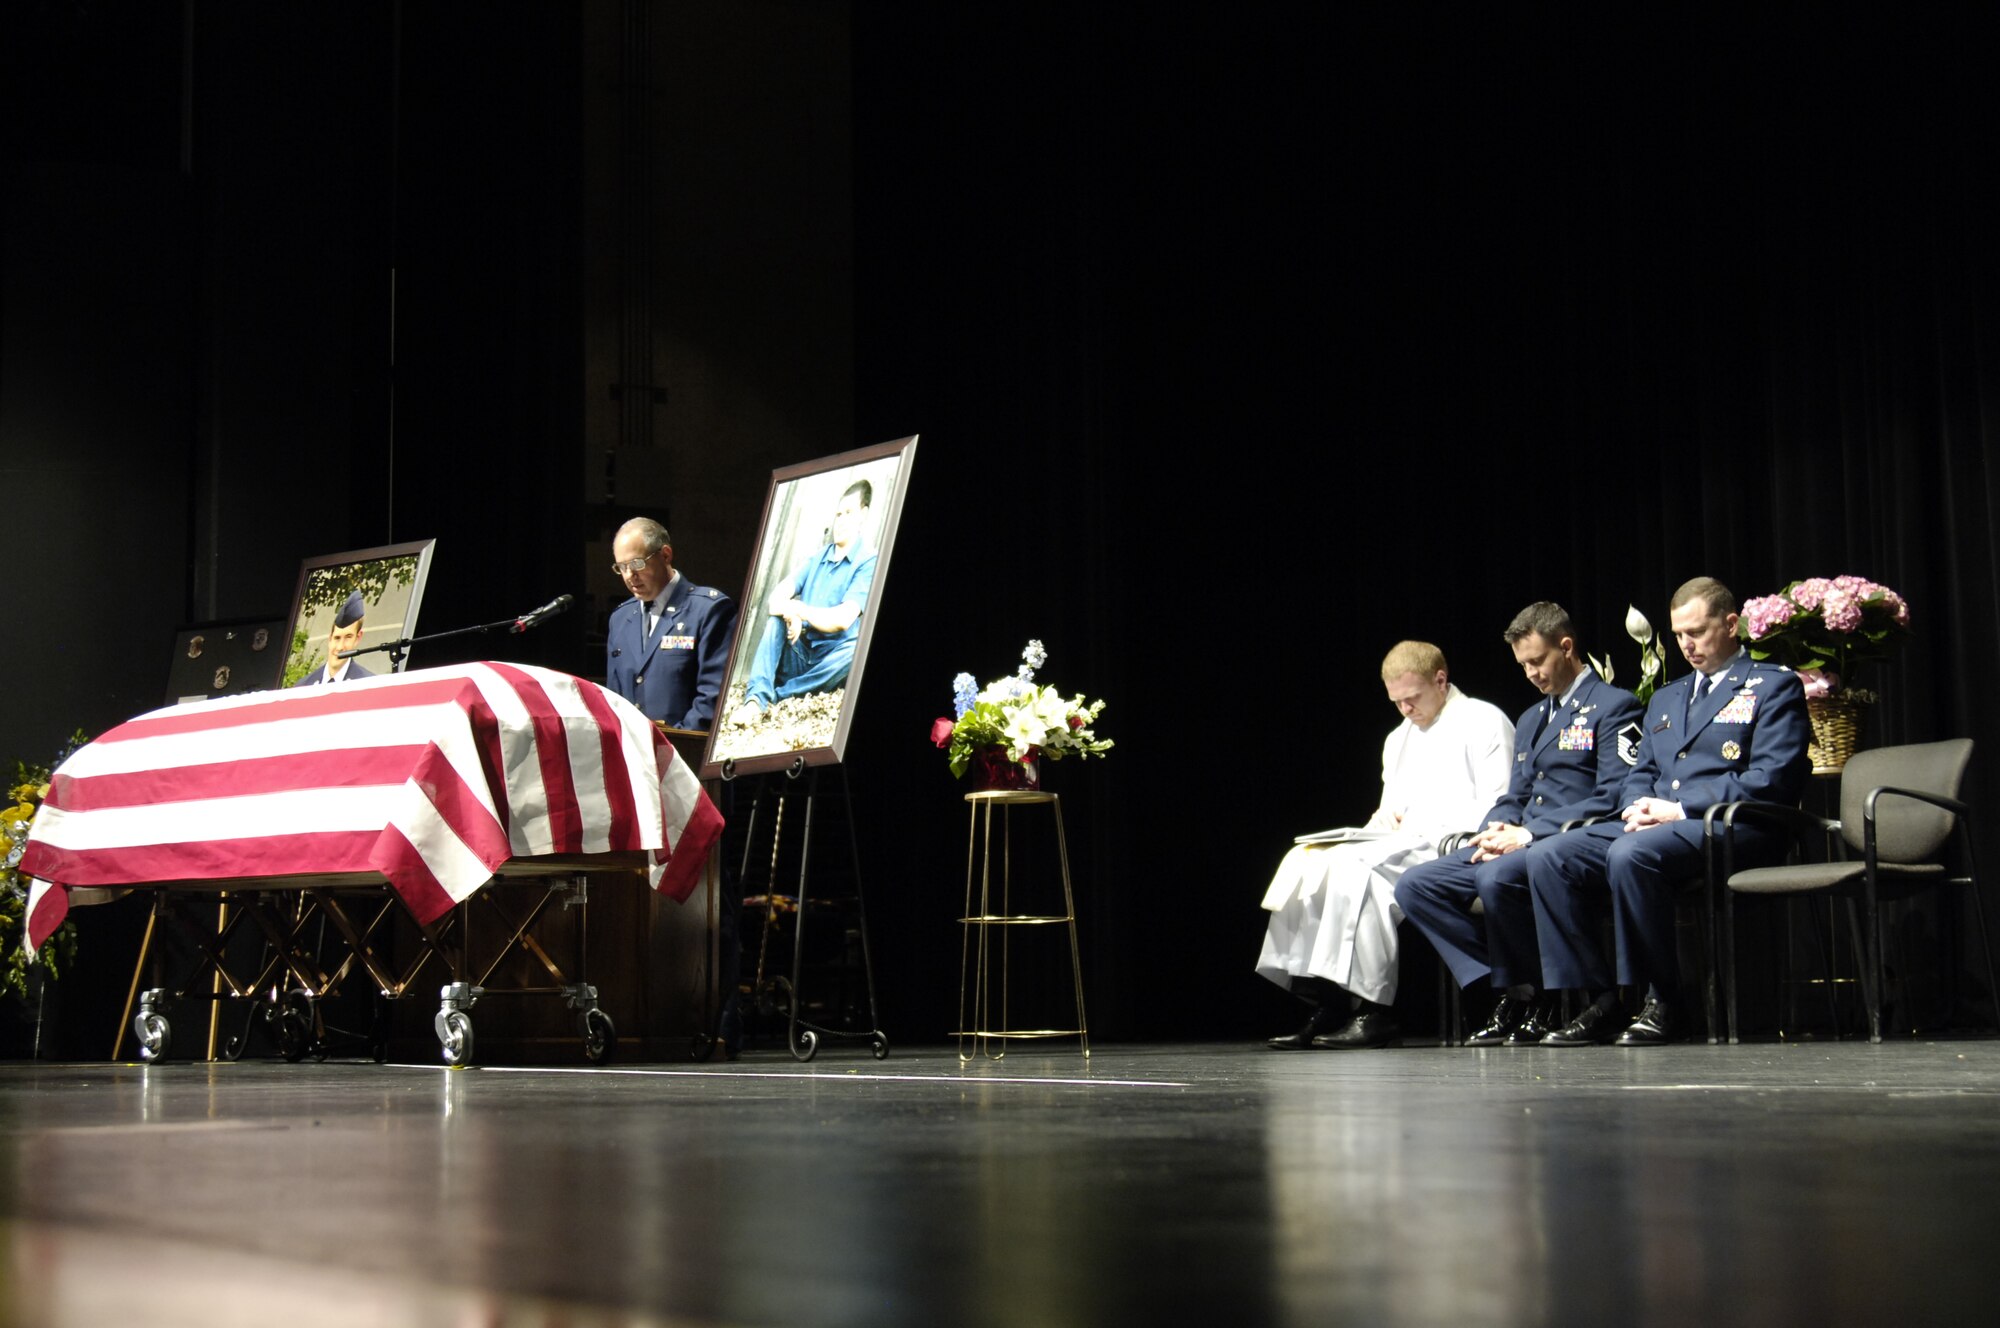 Above, Chaplain (Capt.) Kraig Smith with the 72nd Air Base Wing Chaplain Corps at Tinker Air Force Base provides the opening prayer during a memorial service for Staff Sgt. Daniel Fannin. More than 1,700 people packed the Rose State College Performing Arts Theater on Monday for a memorial service for the former sensor operator assigned to the 552nd Operations Support Squadron, who was killed April 27 along with three other Airmen in a plane crash near Kandahar Airfield in southern Afghanistan. Seated on the stage are, from left, Pastor Craig Born, Gethsemane Lutheran Church; Master Sgt. Christopher Charpentier, who served previously with Sergeant Fannin in the 960th Airborne Air Control Squadron at Tinker; and Col. Greg Guillot, commander, 552nd Air Control Wing. Sergeant Fannin, 30, originally of Morehead, Ky., is survived by his wife, Sonya, of Oklahoma City. The couple has no children. (Air Force photo by Darren D. Heusel)